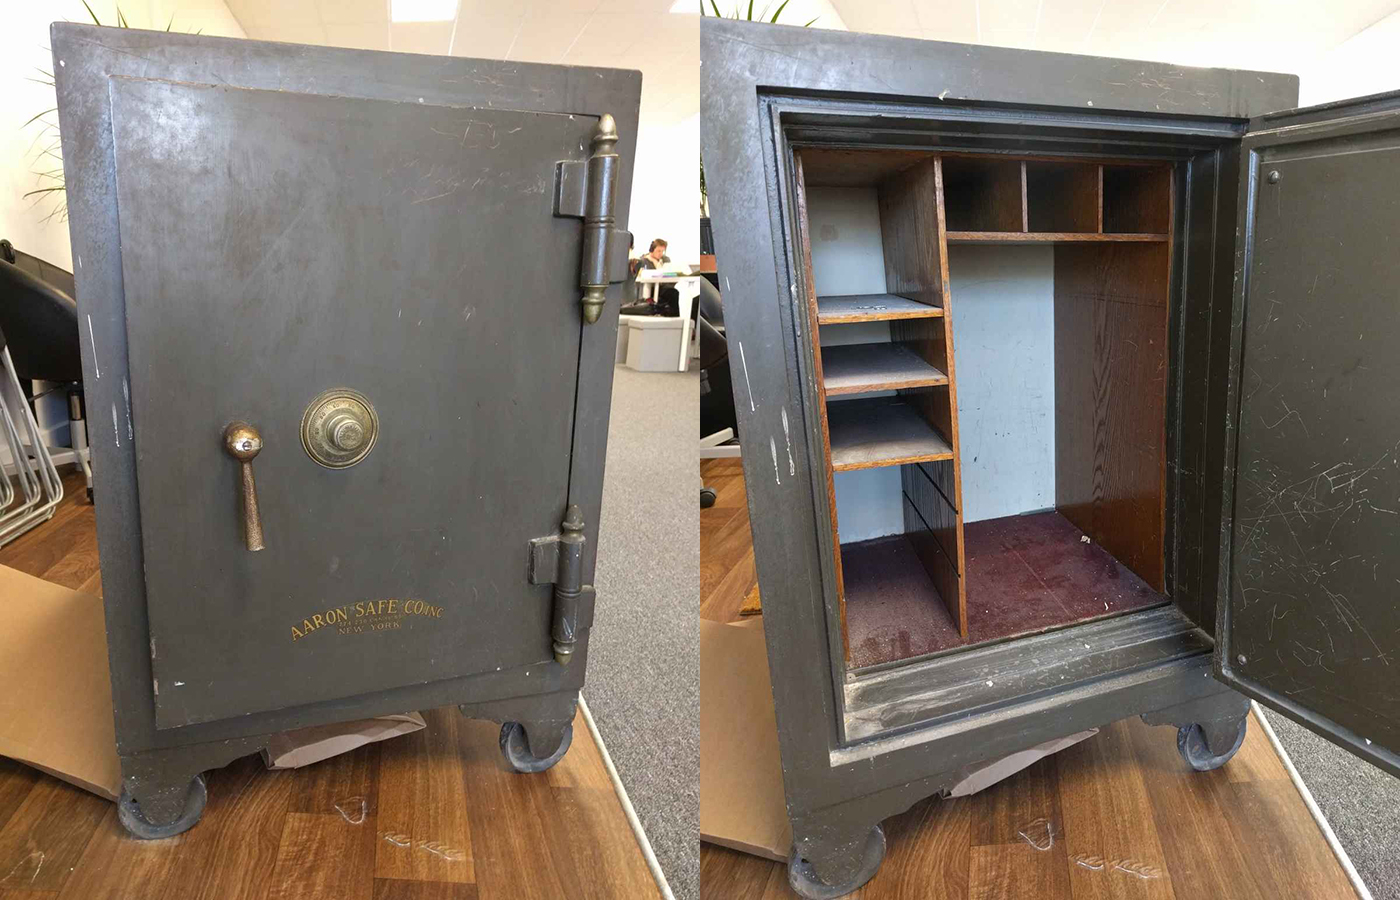 Antique Safe for Free Brooklyn